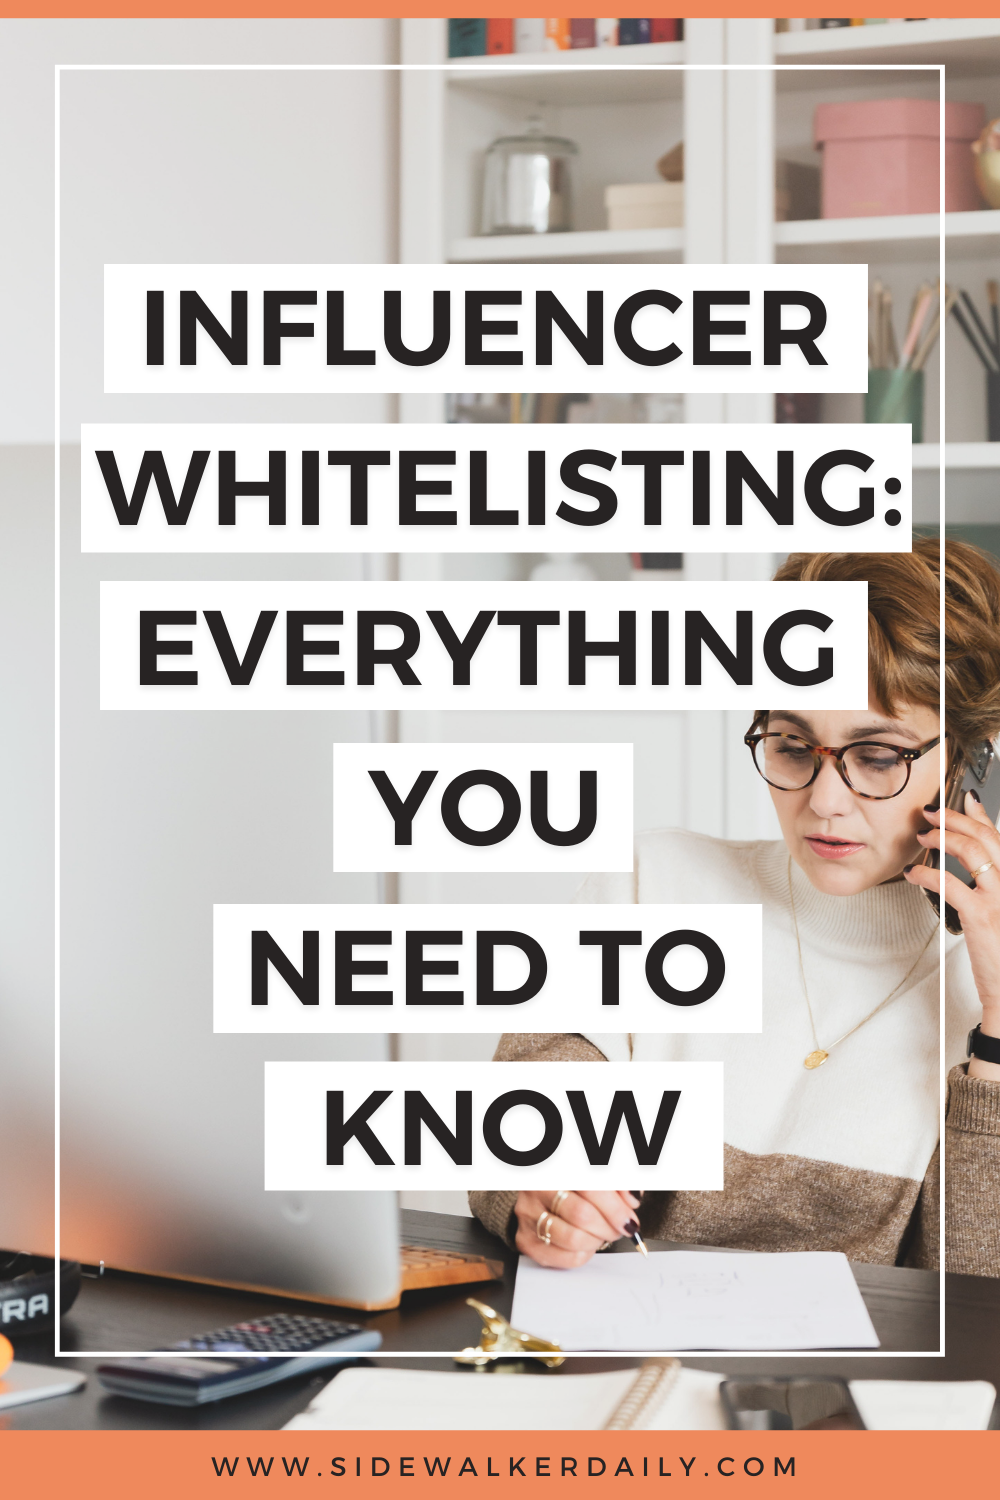 Leveraging Trust: A Comprehensive Guide to Whitelisting Influencer Content